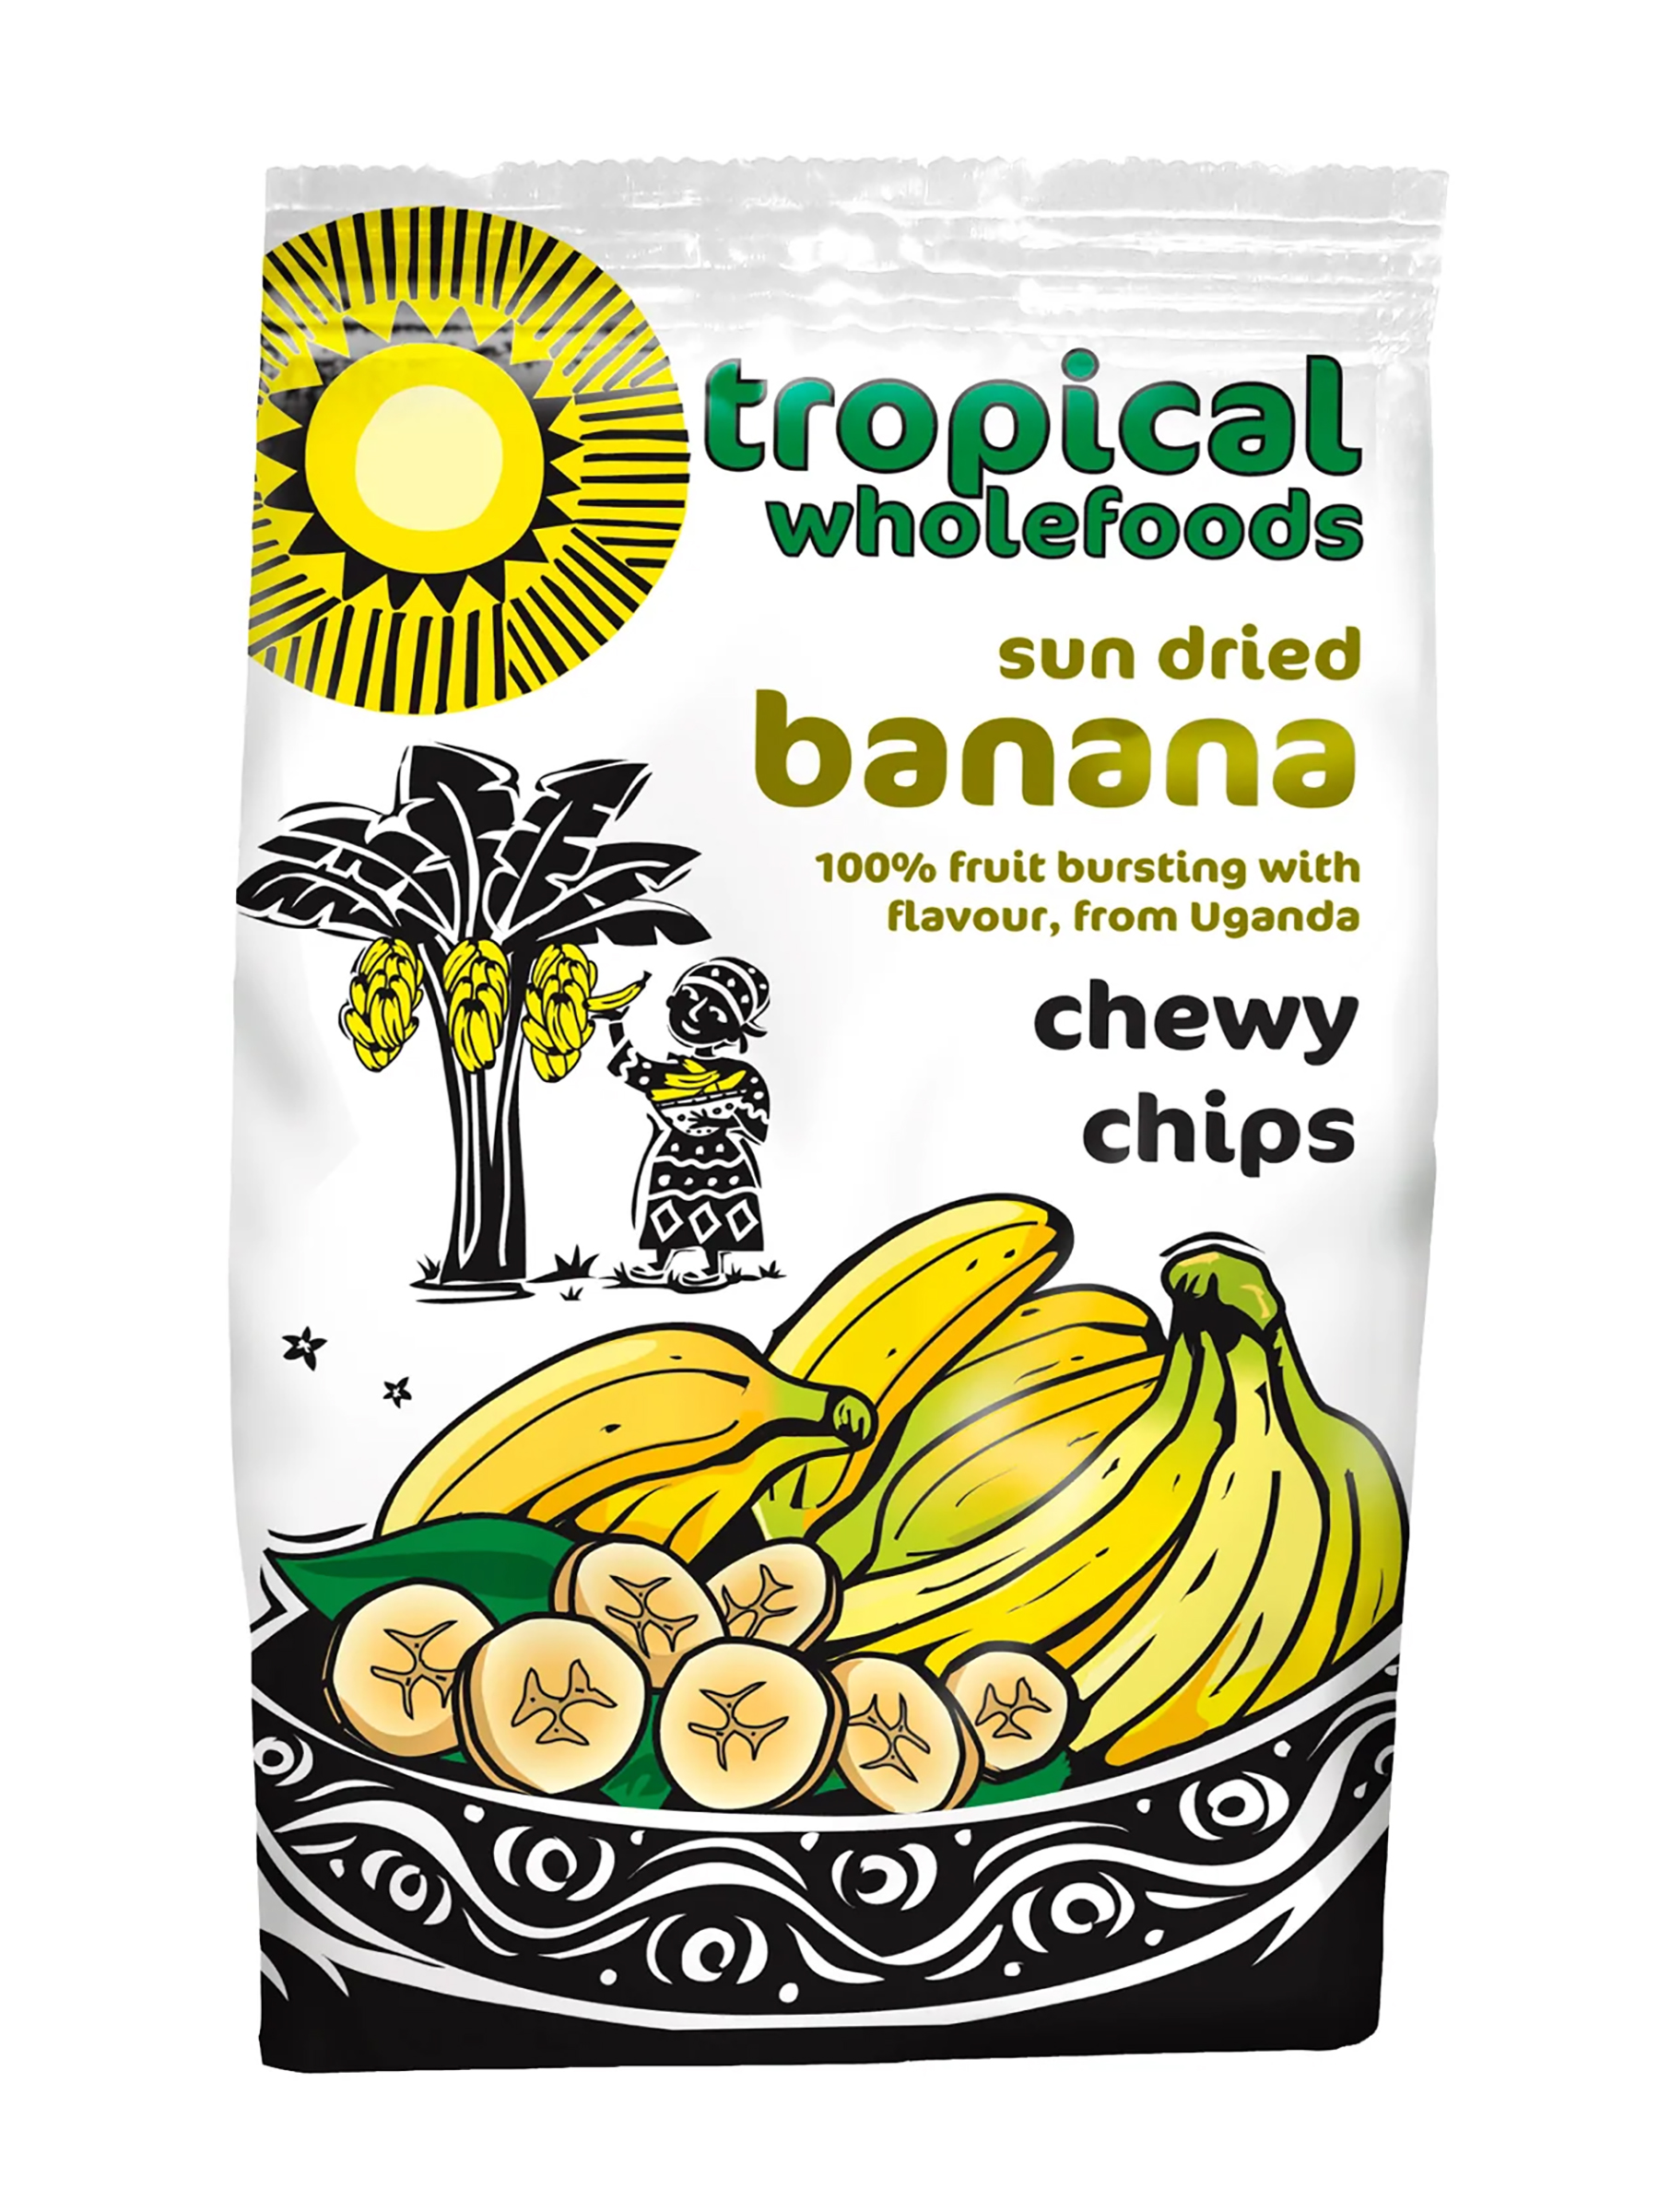 Dried Banana Chewy Chips 150g - No added ingredients (Tropical Wholefoods)